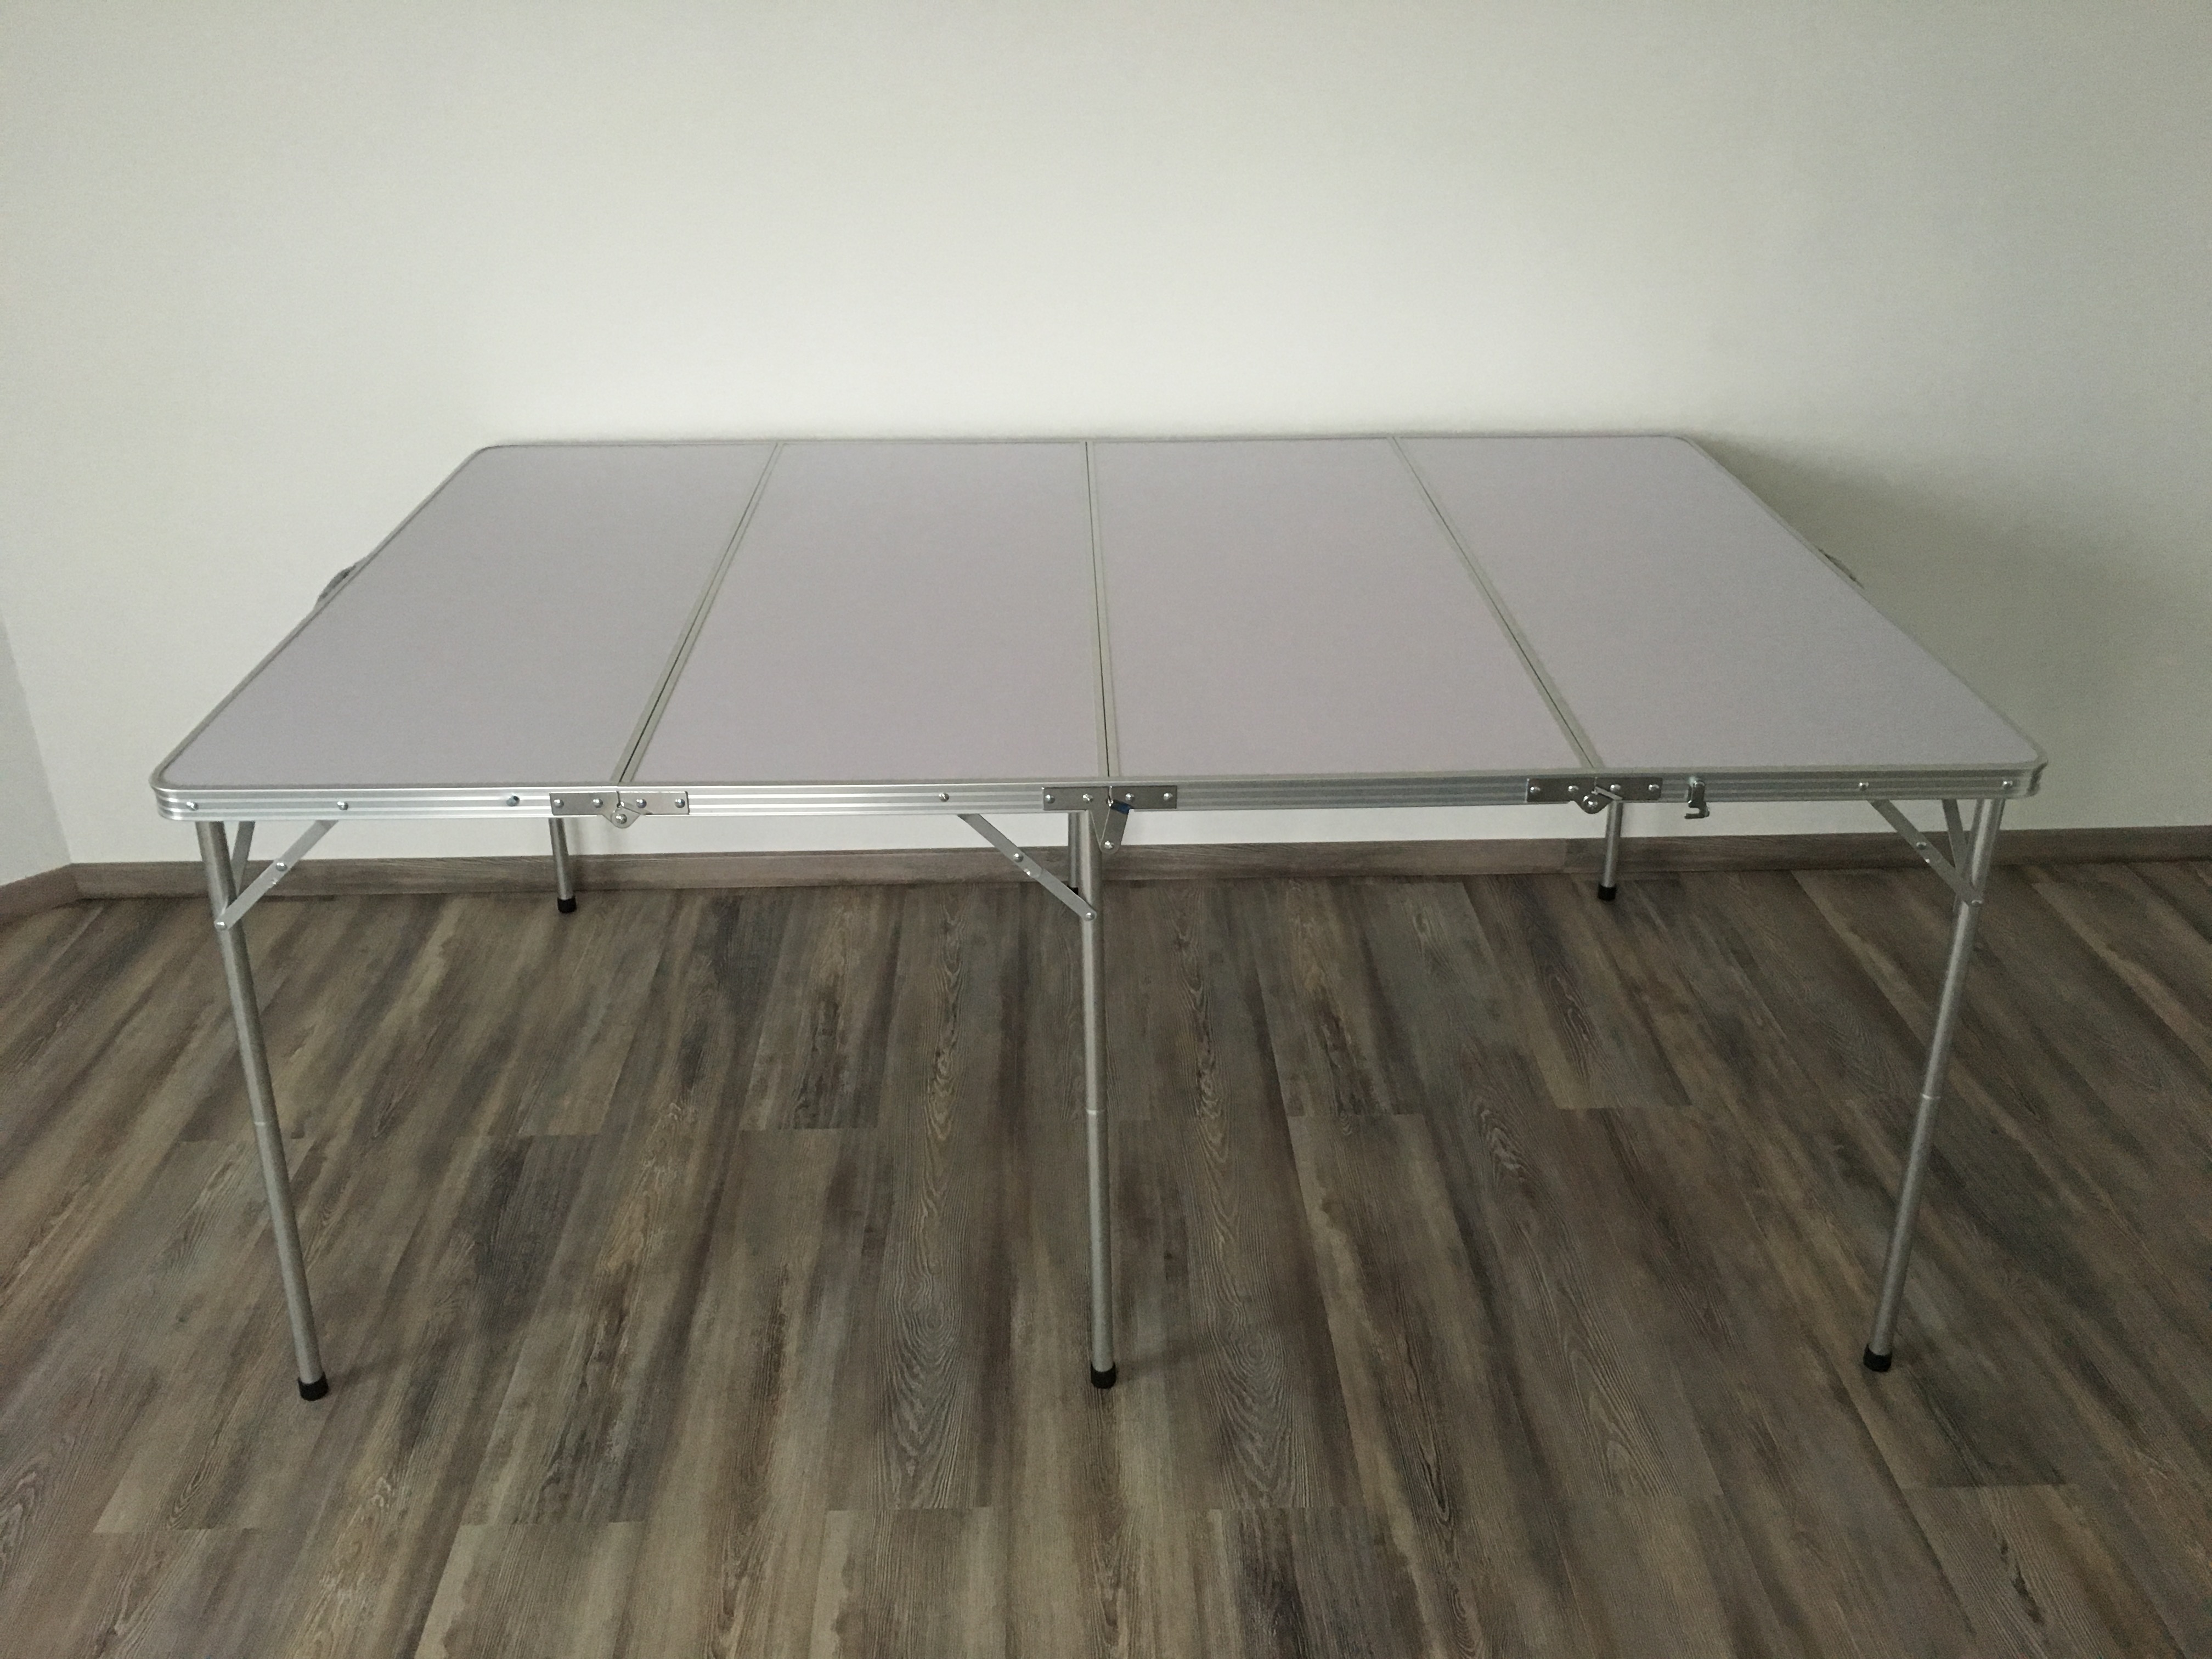 6’x4′ portable gaming folding table back in stock now